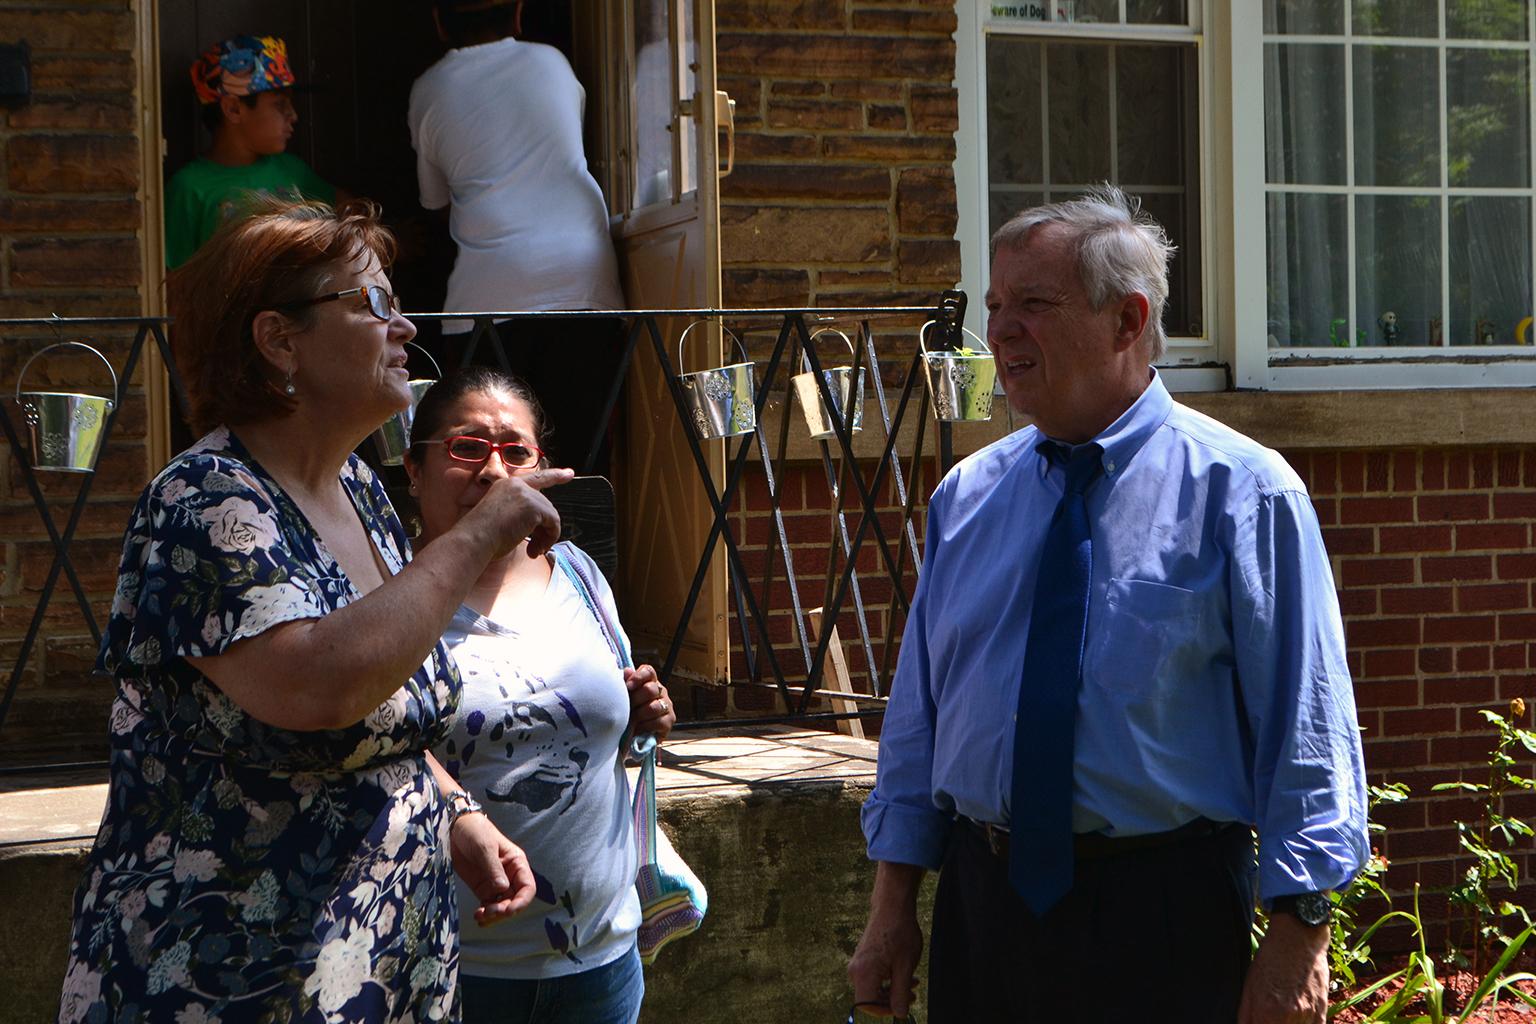 U.S. Sen. Dick Durbin talks with a Southeast Side resident outside of her home Thursday. (Alex Ruppenthal / Chicago Tonight)